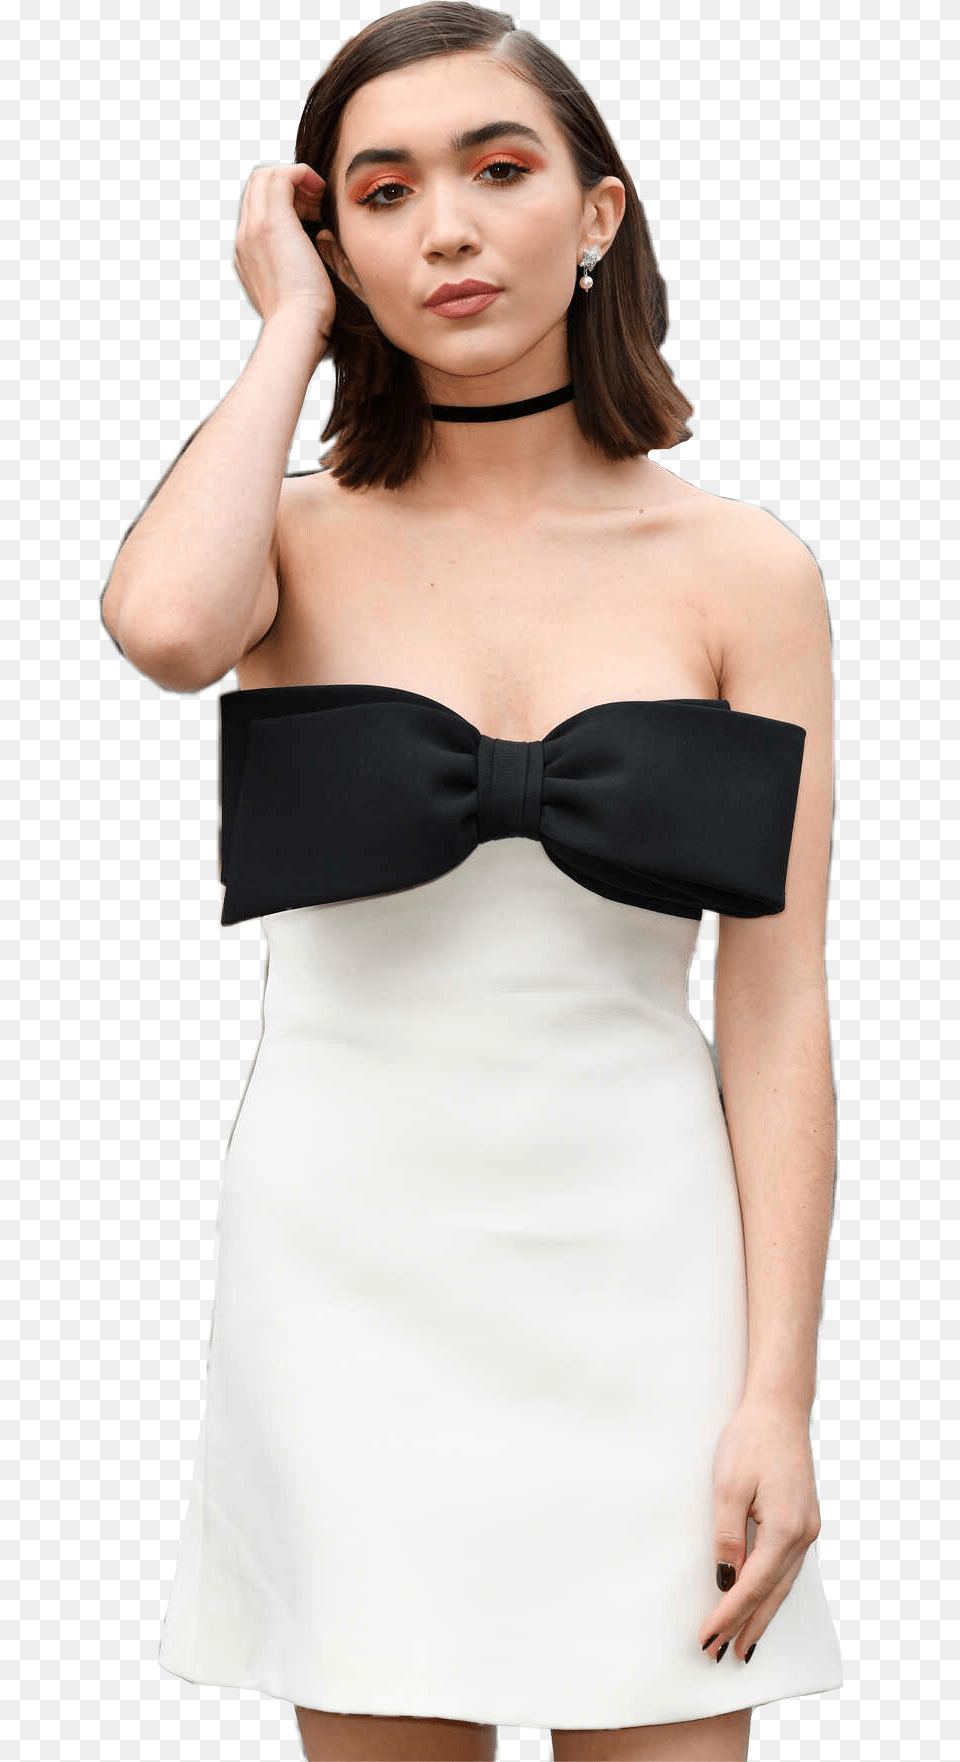 Rowan Blanchard Cocktail Dress, Adult, Female, Formal Wear, Person Free Transparent Png